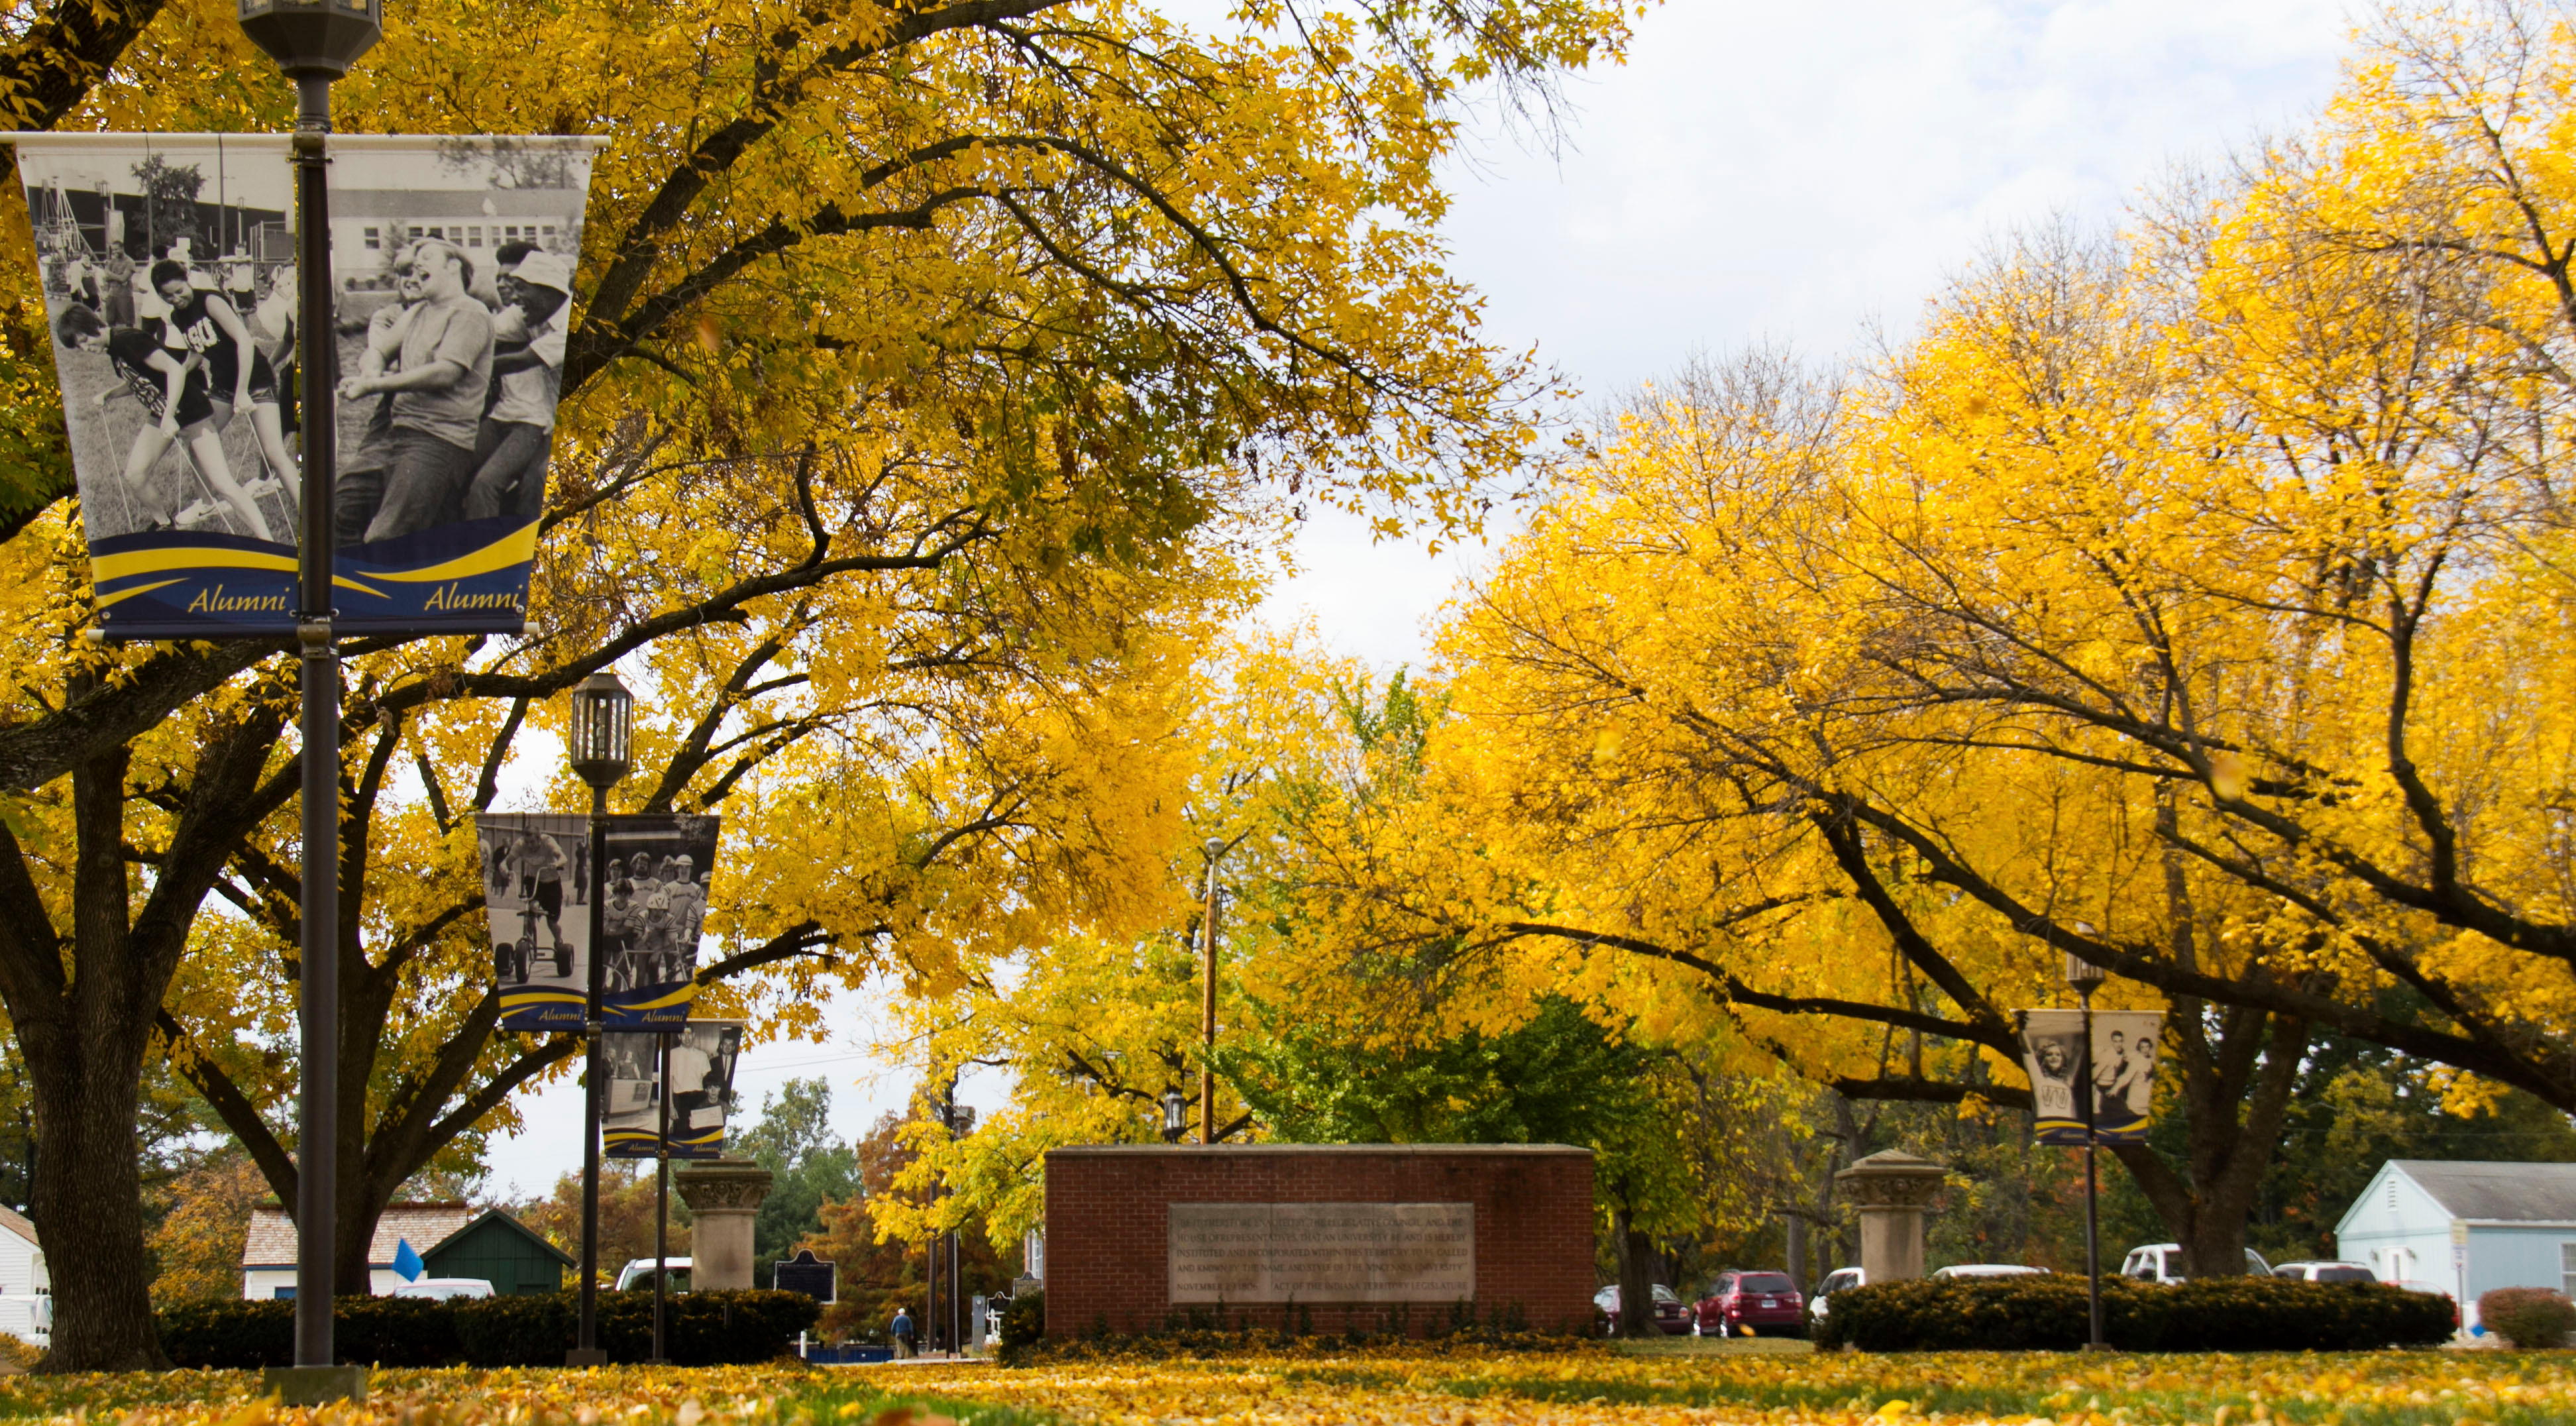 Trees with yellow leaves on the Vincennes Campus during the Fall season